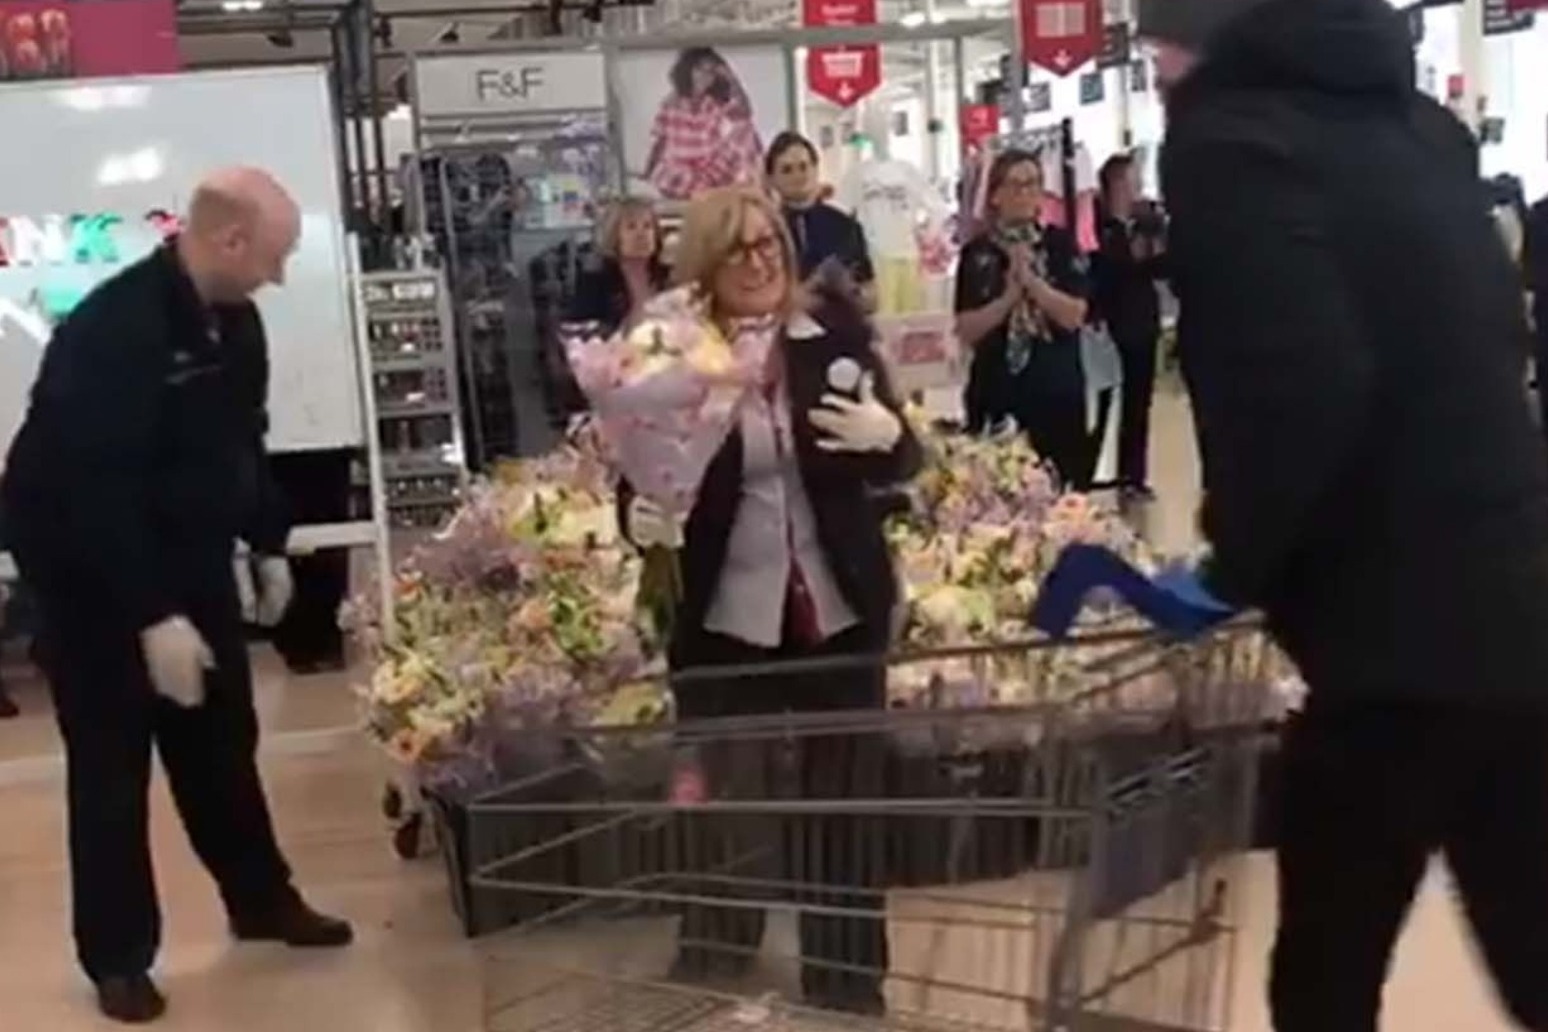 NHS workers given round of applause and flowers by Tesco staff 